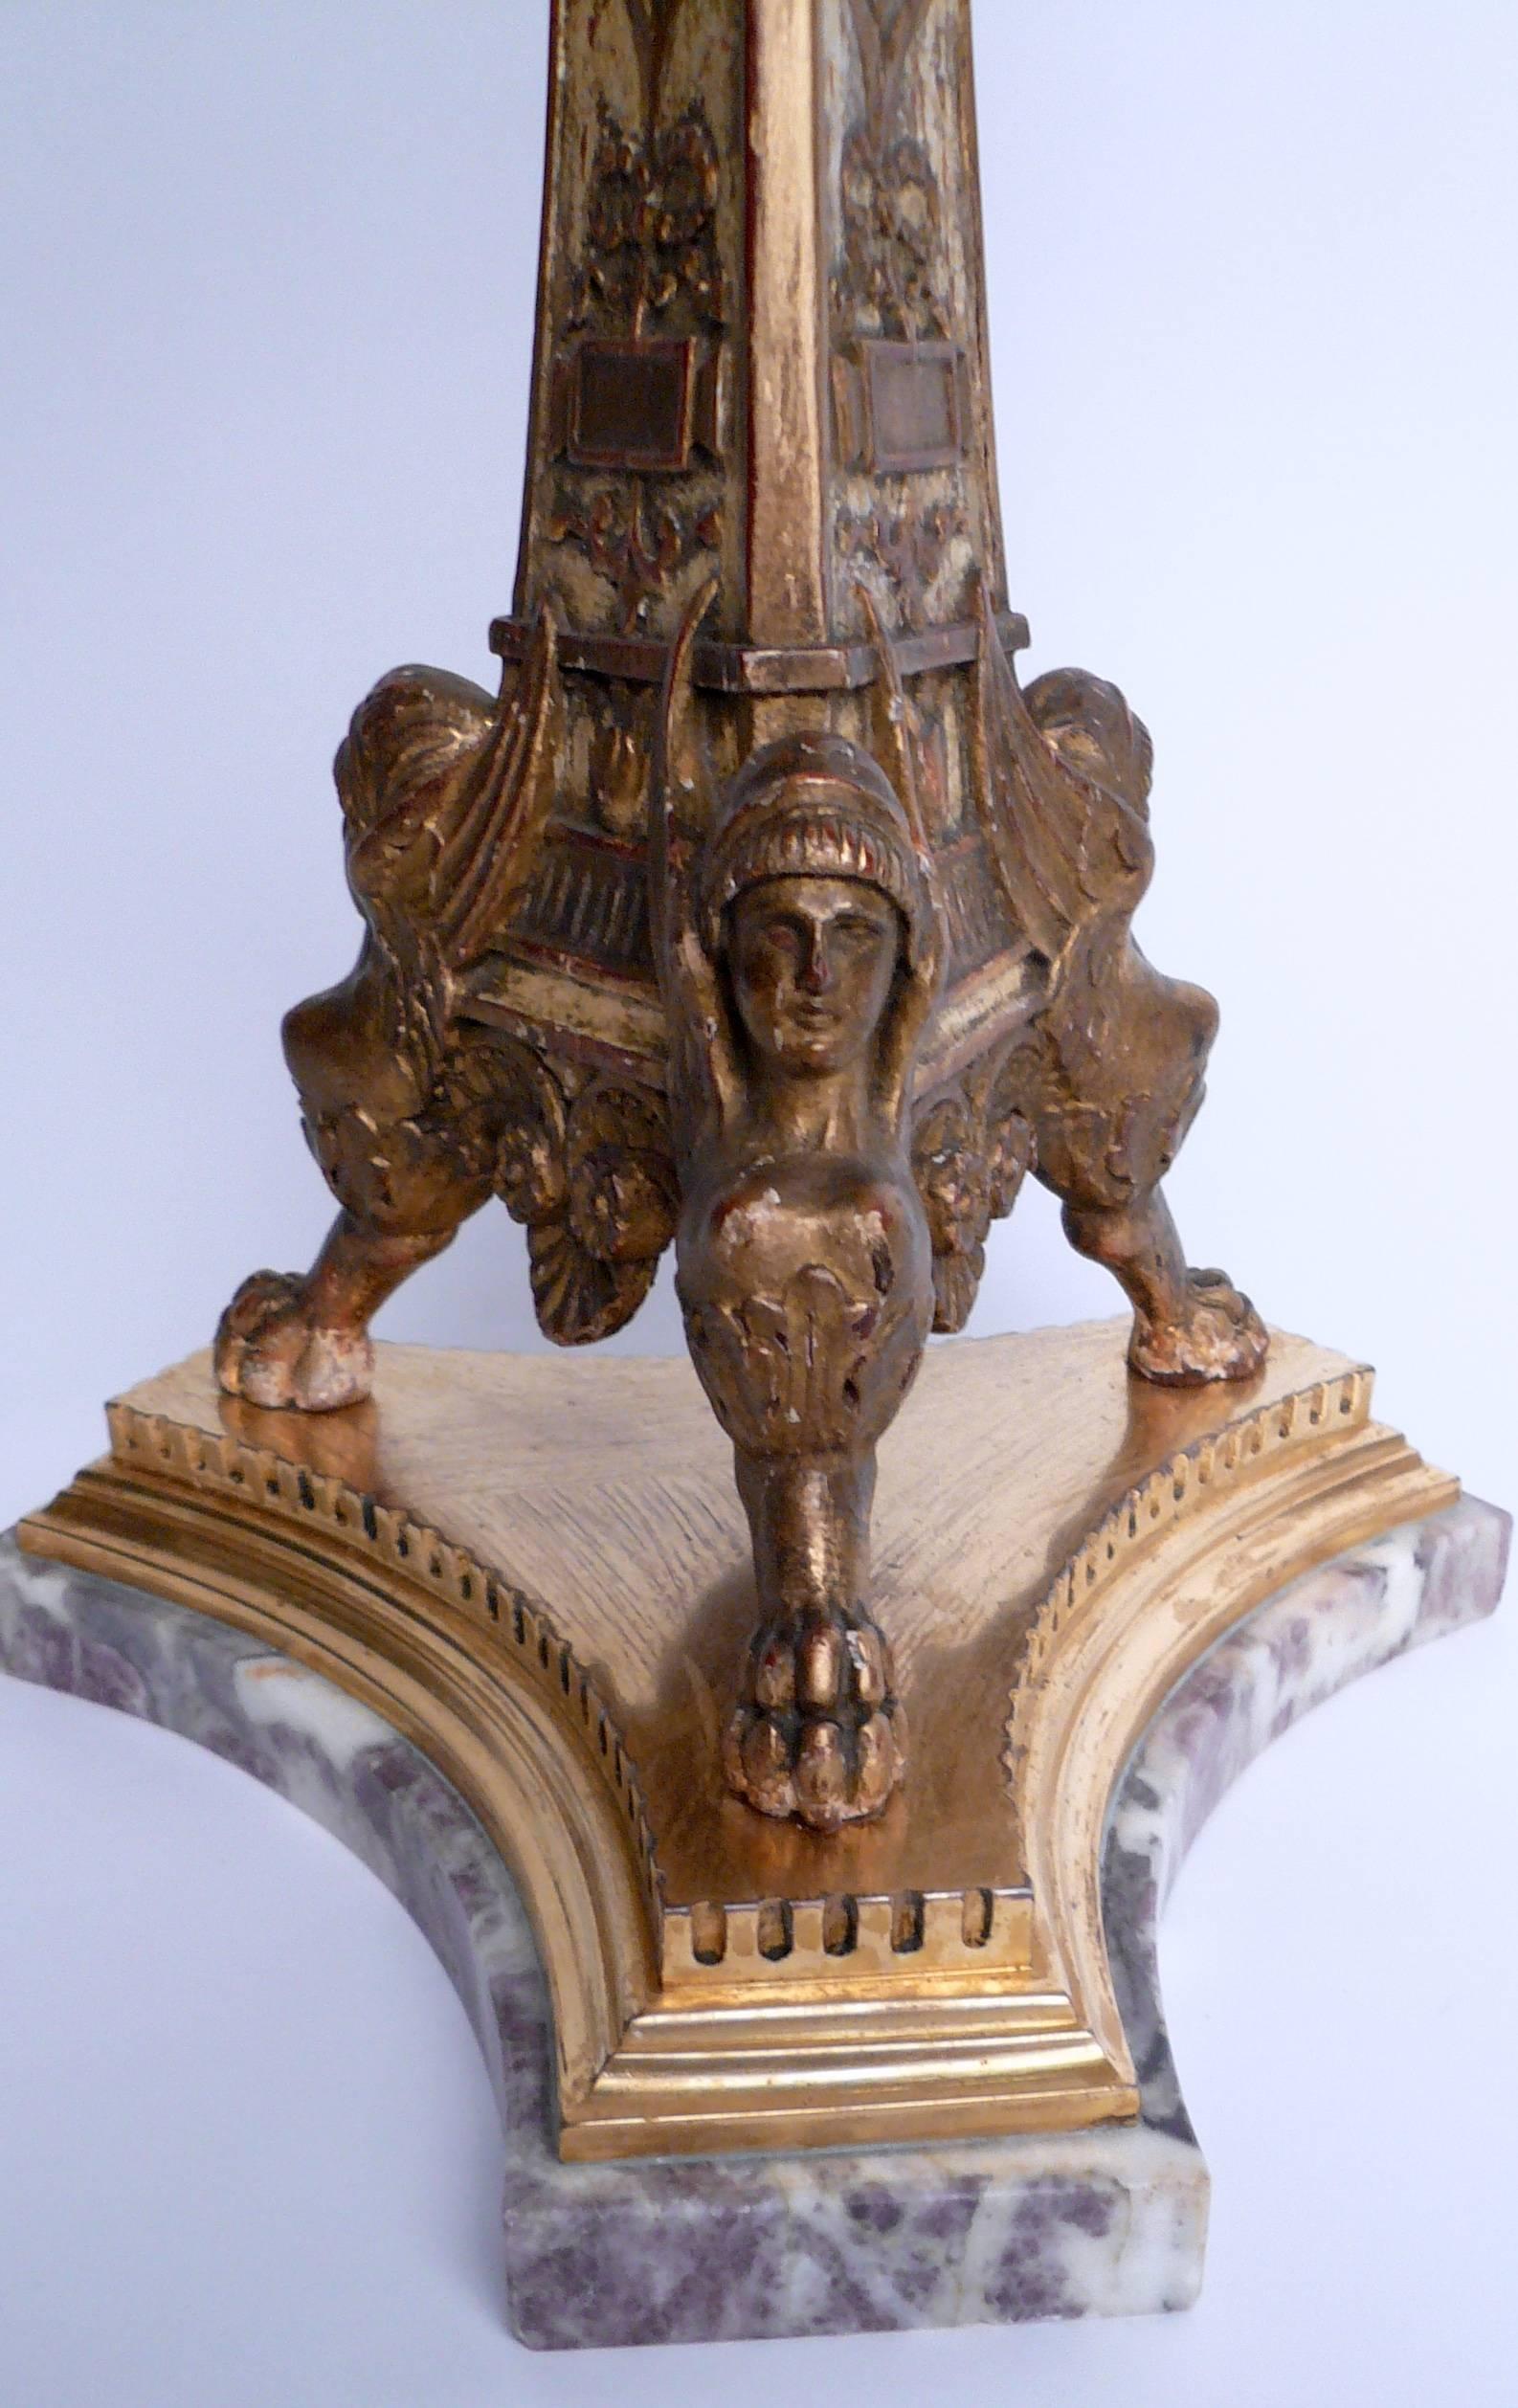 This Caldwell lamp features Classical motifs, including acanthus leaves and urns on a tripod sphinx form base.